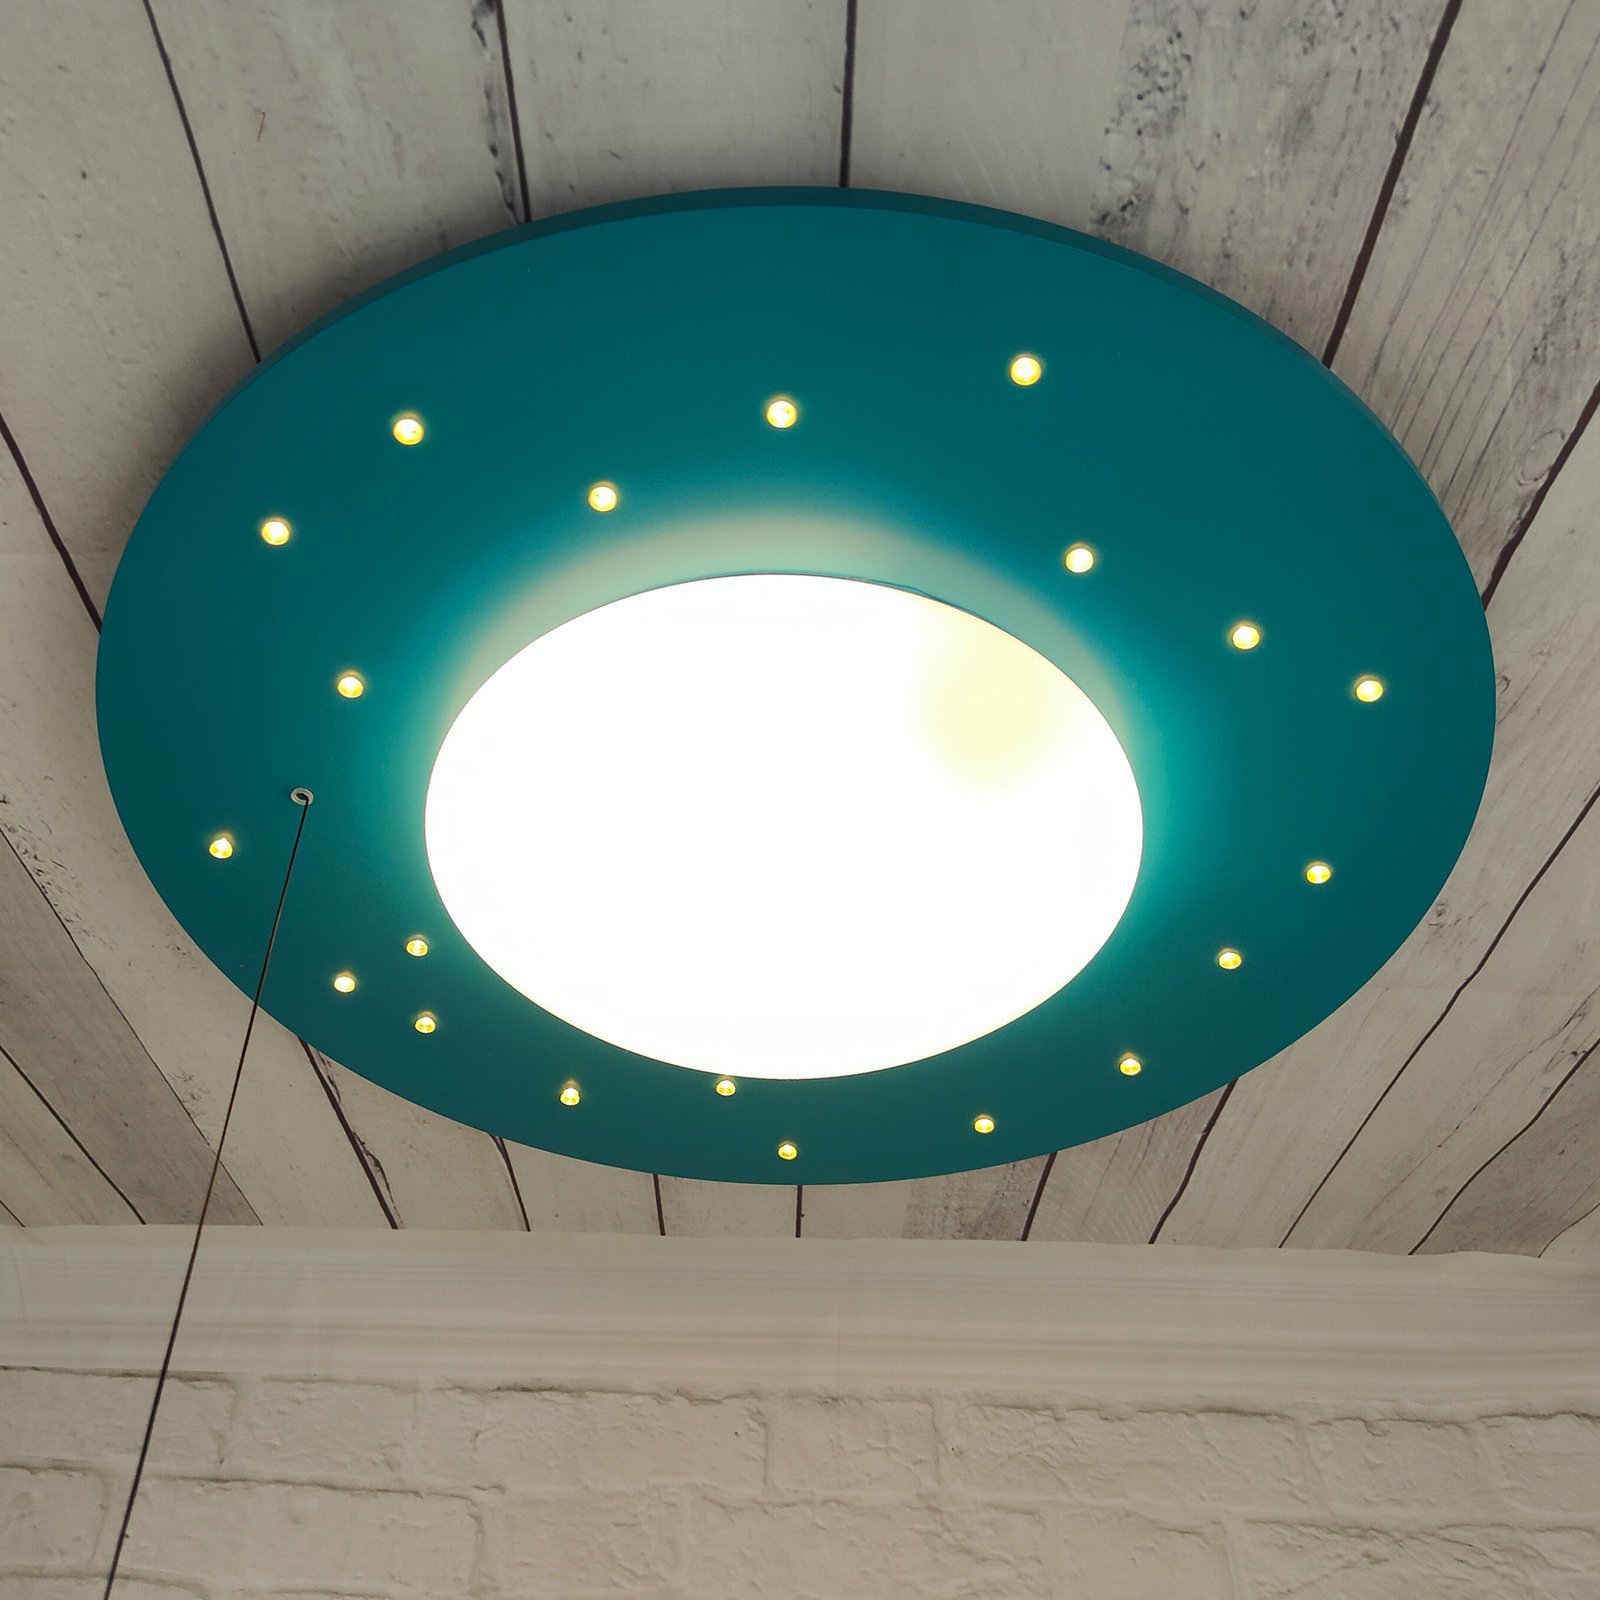 Starlight ceiling light with a starry sky, blue